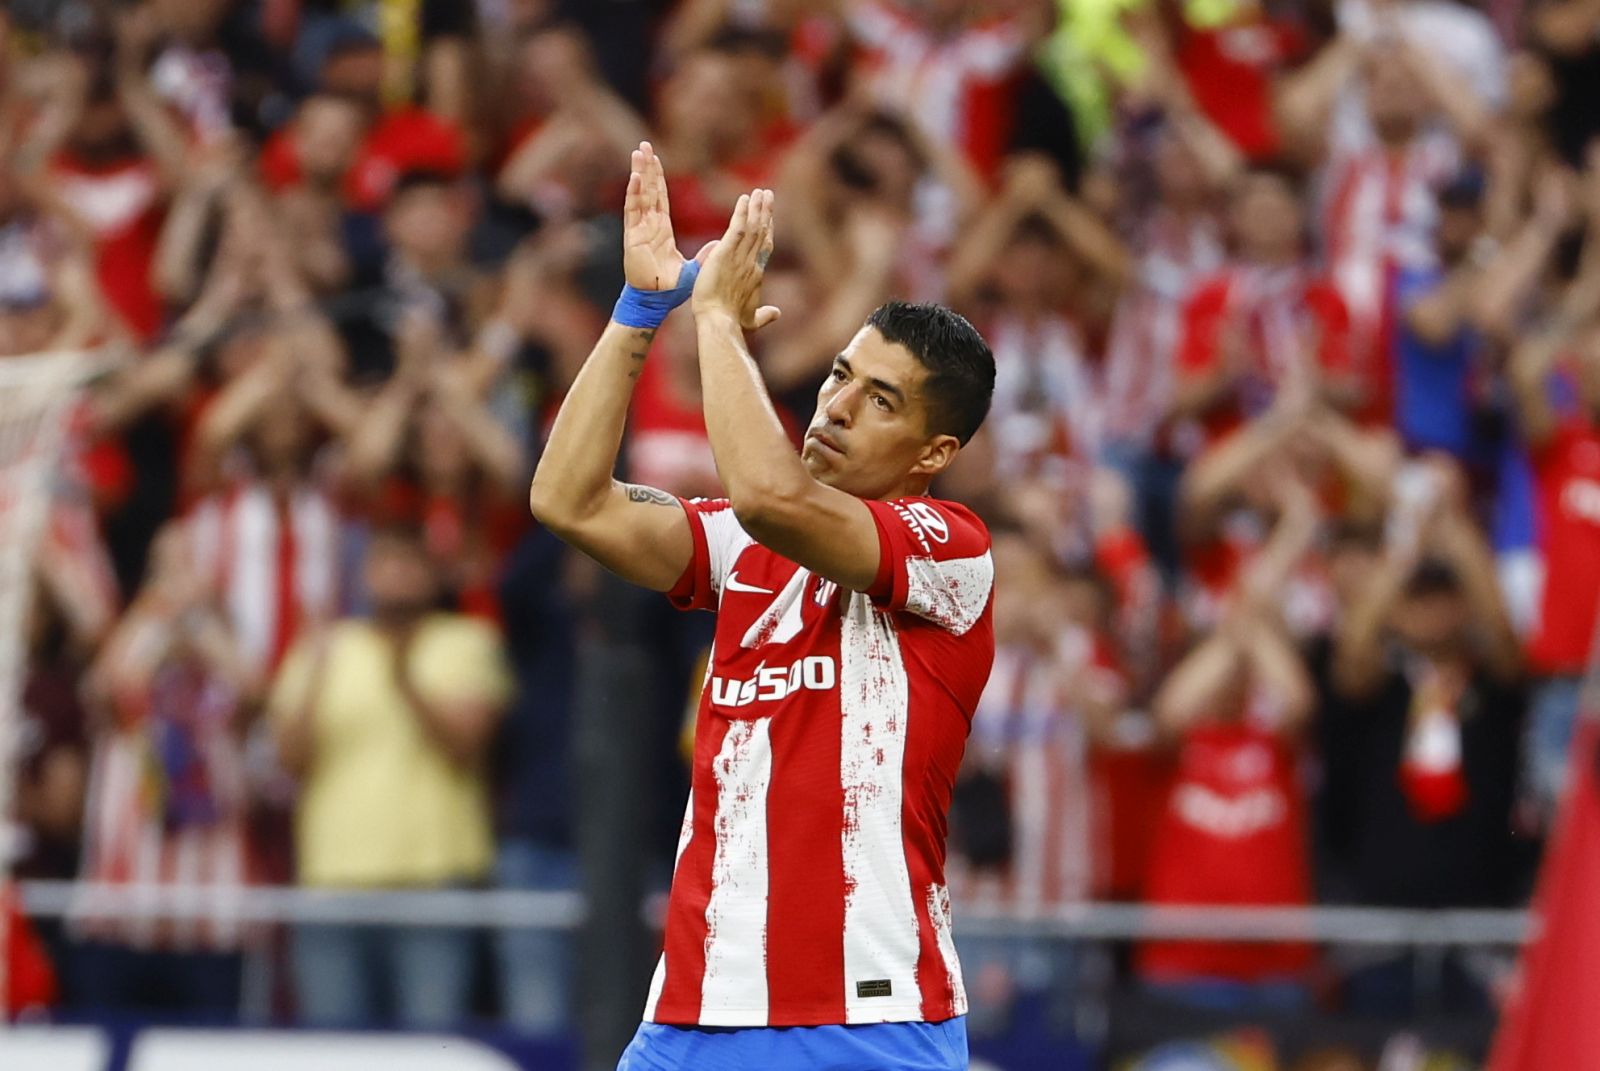 epa09949678 Atletico's Luis Suarez applauds fans as he leaves the pitch during the Spanish LaLiga soccer match between Atletico Madrid and Sevilla FC in Madrid, Spain, 15 May 2022. Uruguayan striker Luis Suarez played his last match for Atletico Madrid.  EPA/Sergio Perez